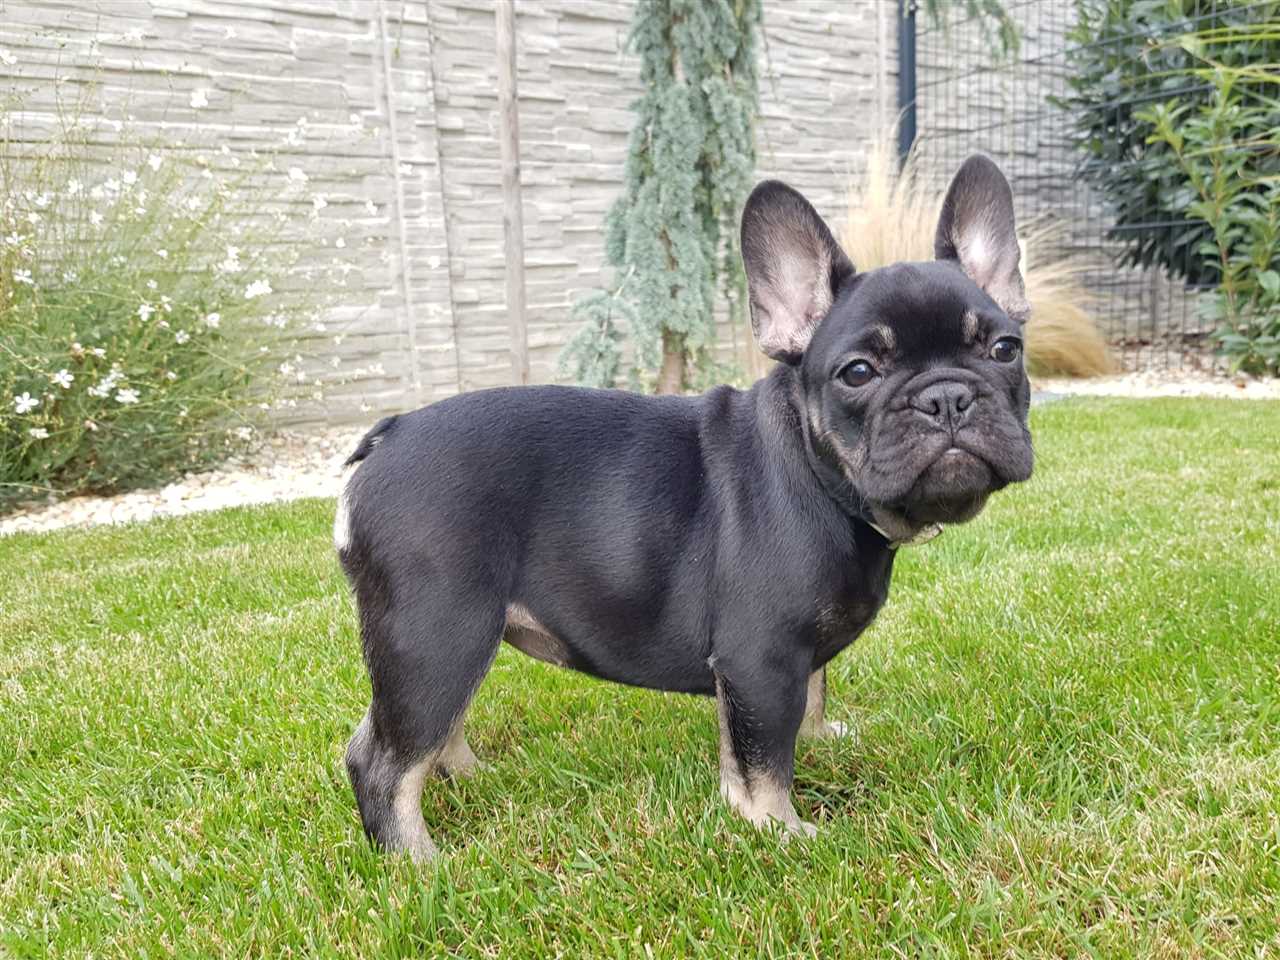 Care and Maintenance of Full Grown Black and Tan French Bulldogs